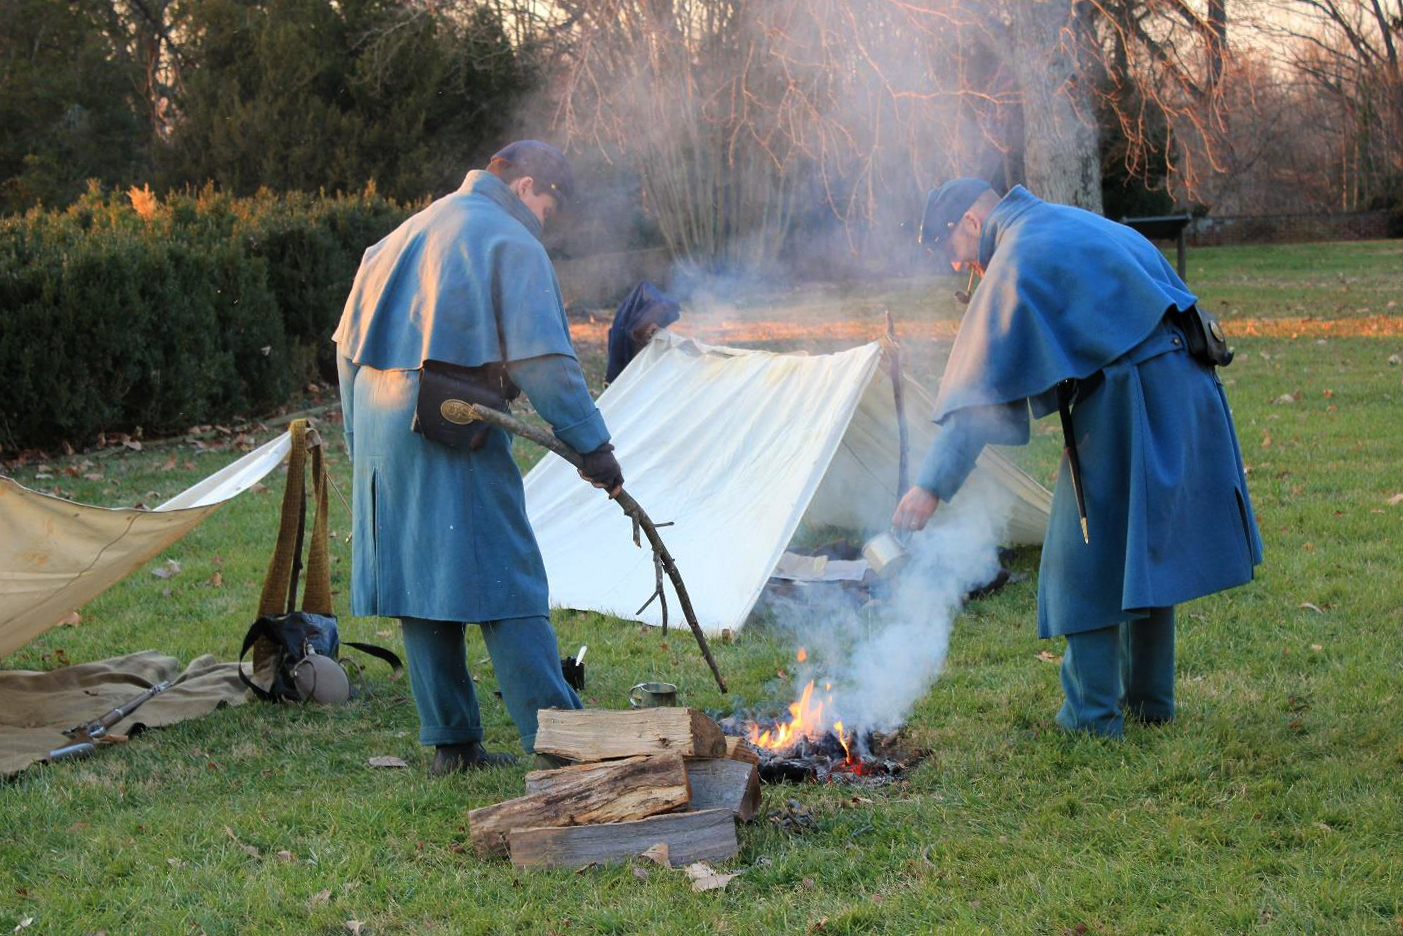 Two living historians dressed as U.S. Civil War soldiers tend to a campfire near a canvas tent.